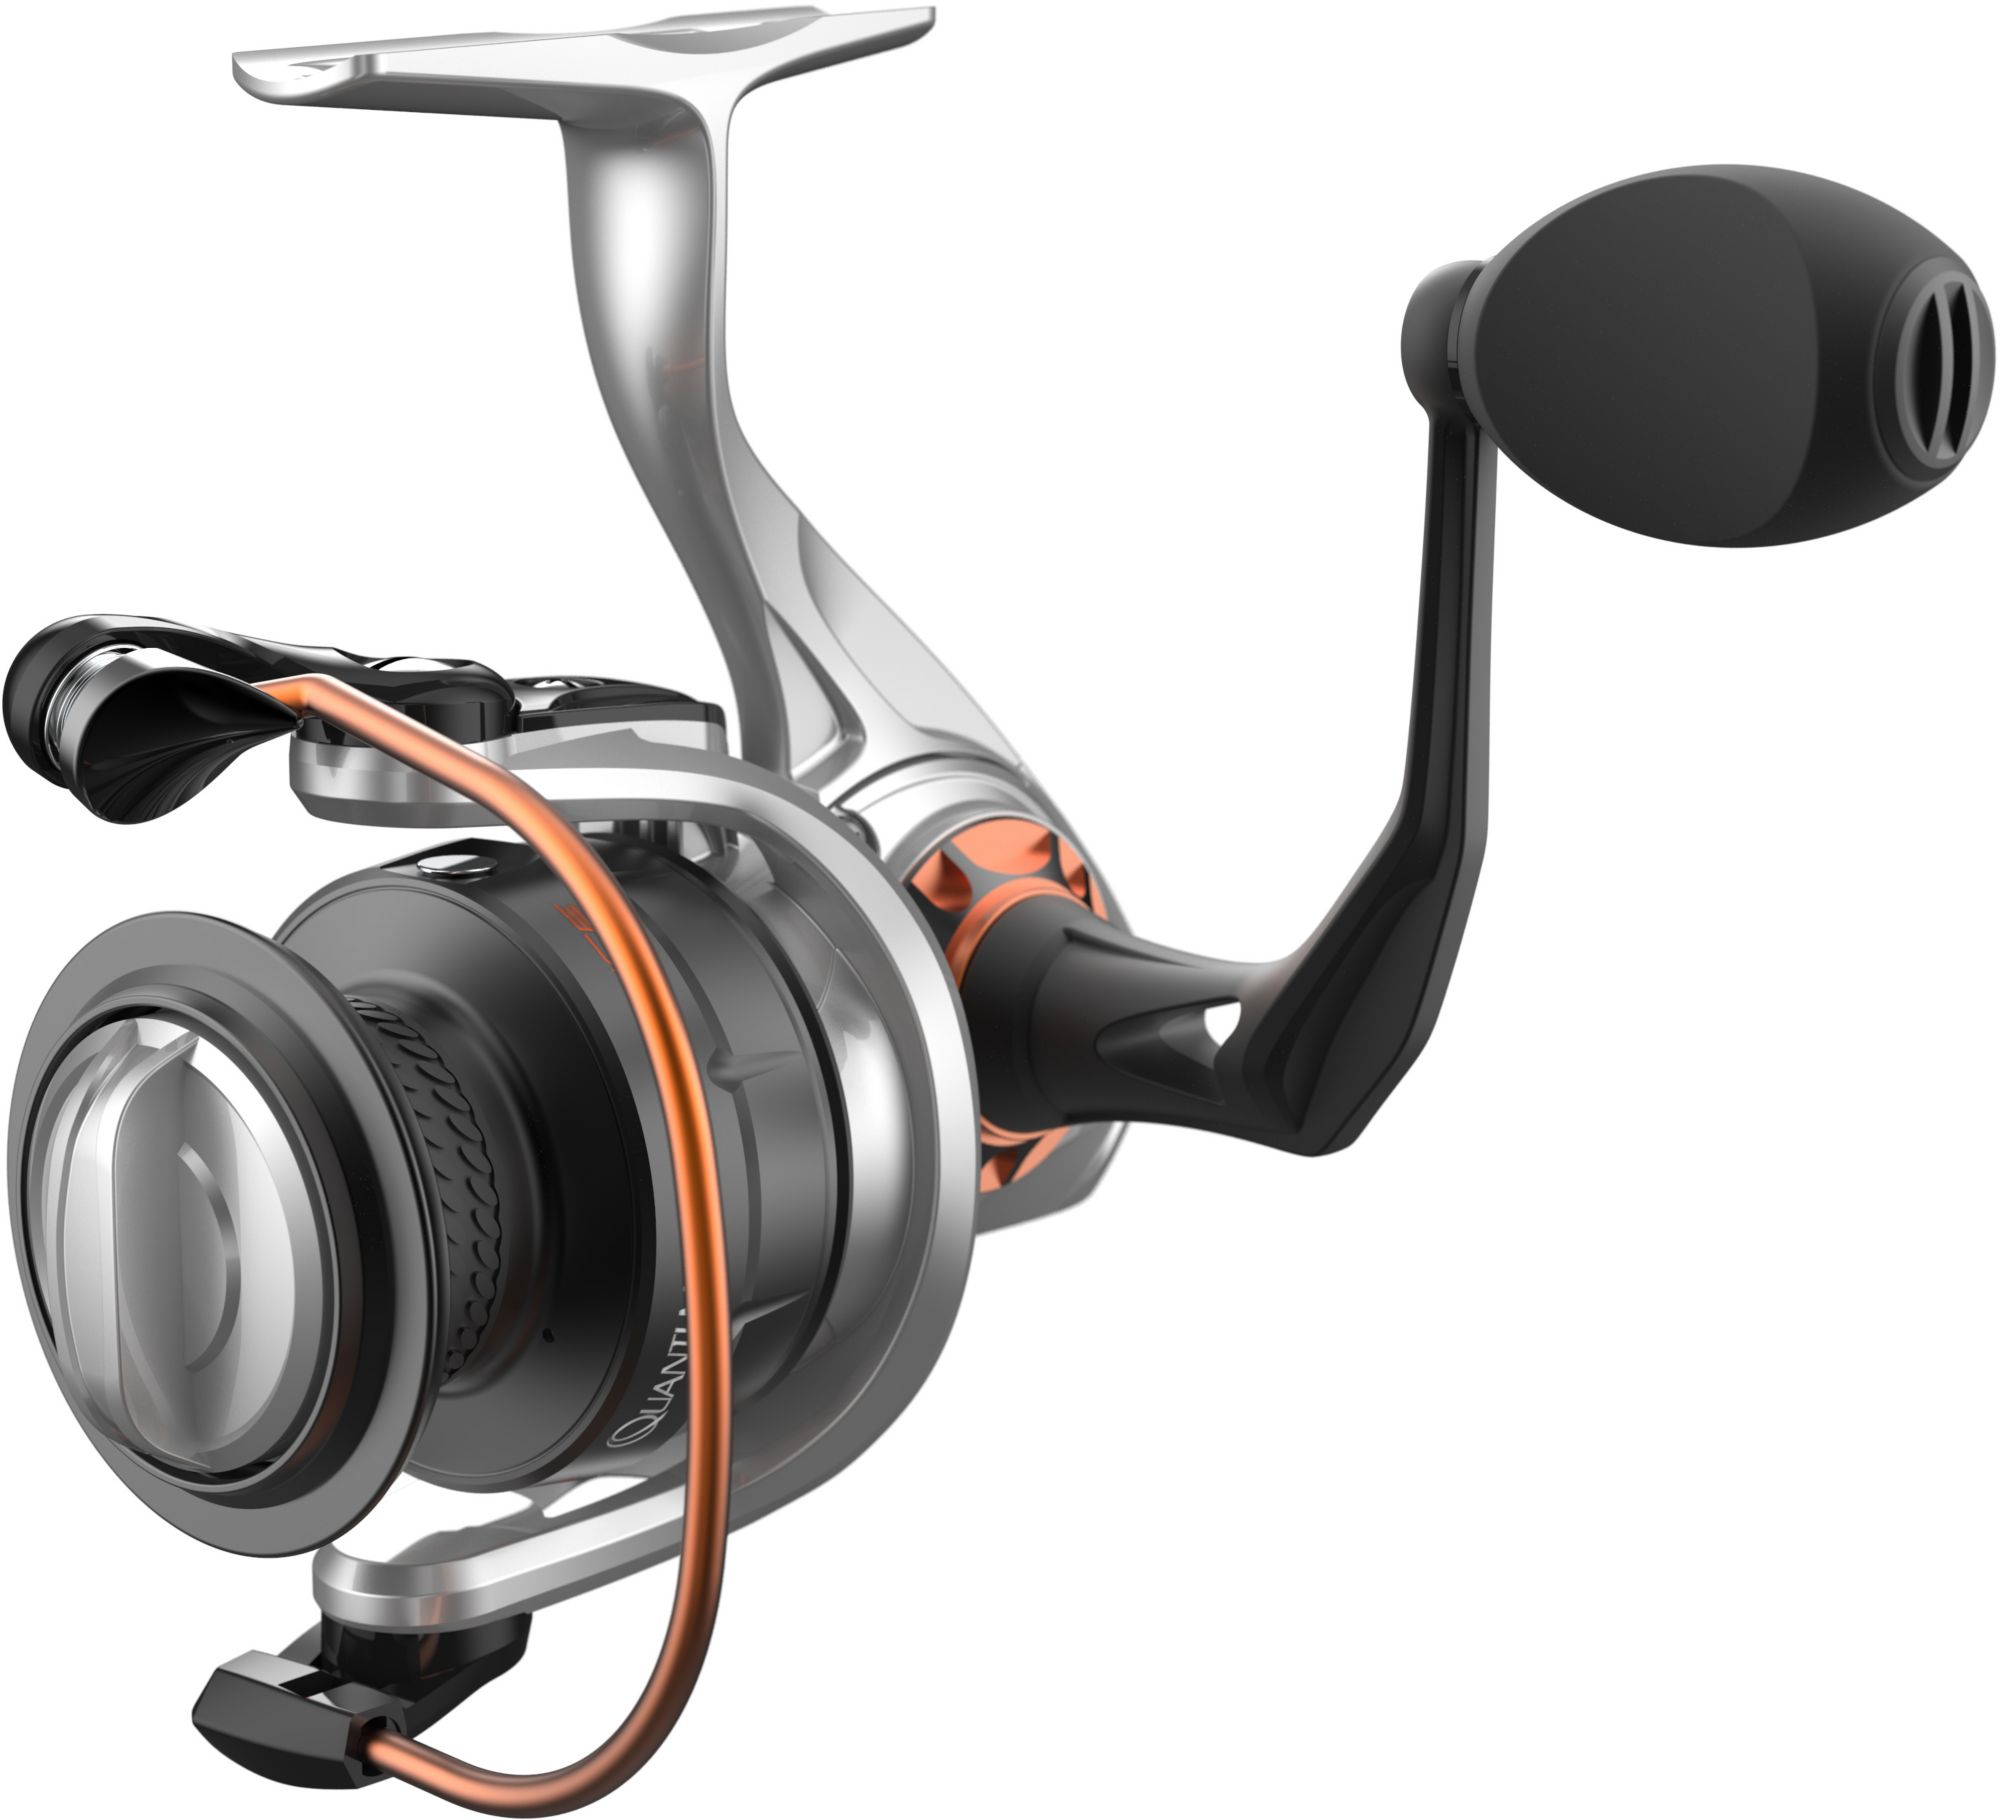 Photos - Other for Fishing Quantum Reliance PT Spinning Reel 20QUTURLNCPT30SZSREE 